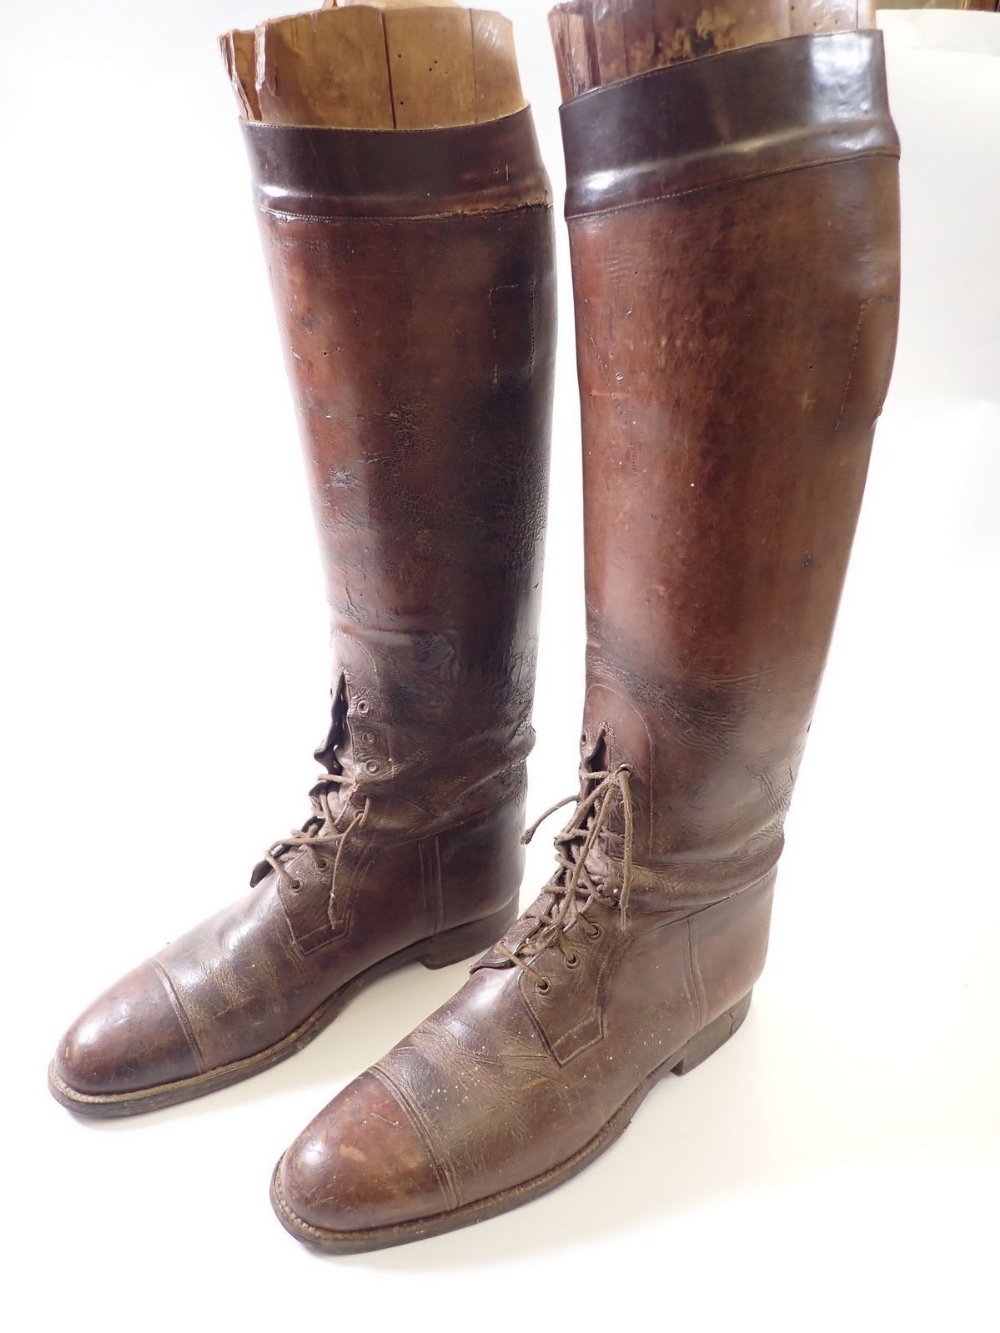 A pair of 1930's mens military brown leather field boots with wooden boot trees, approx size 10 - Image 3 of 4